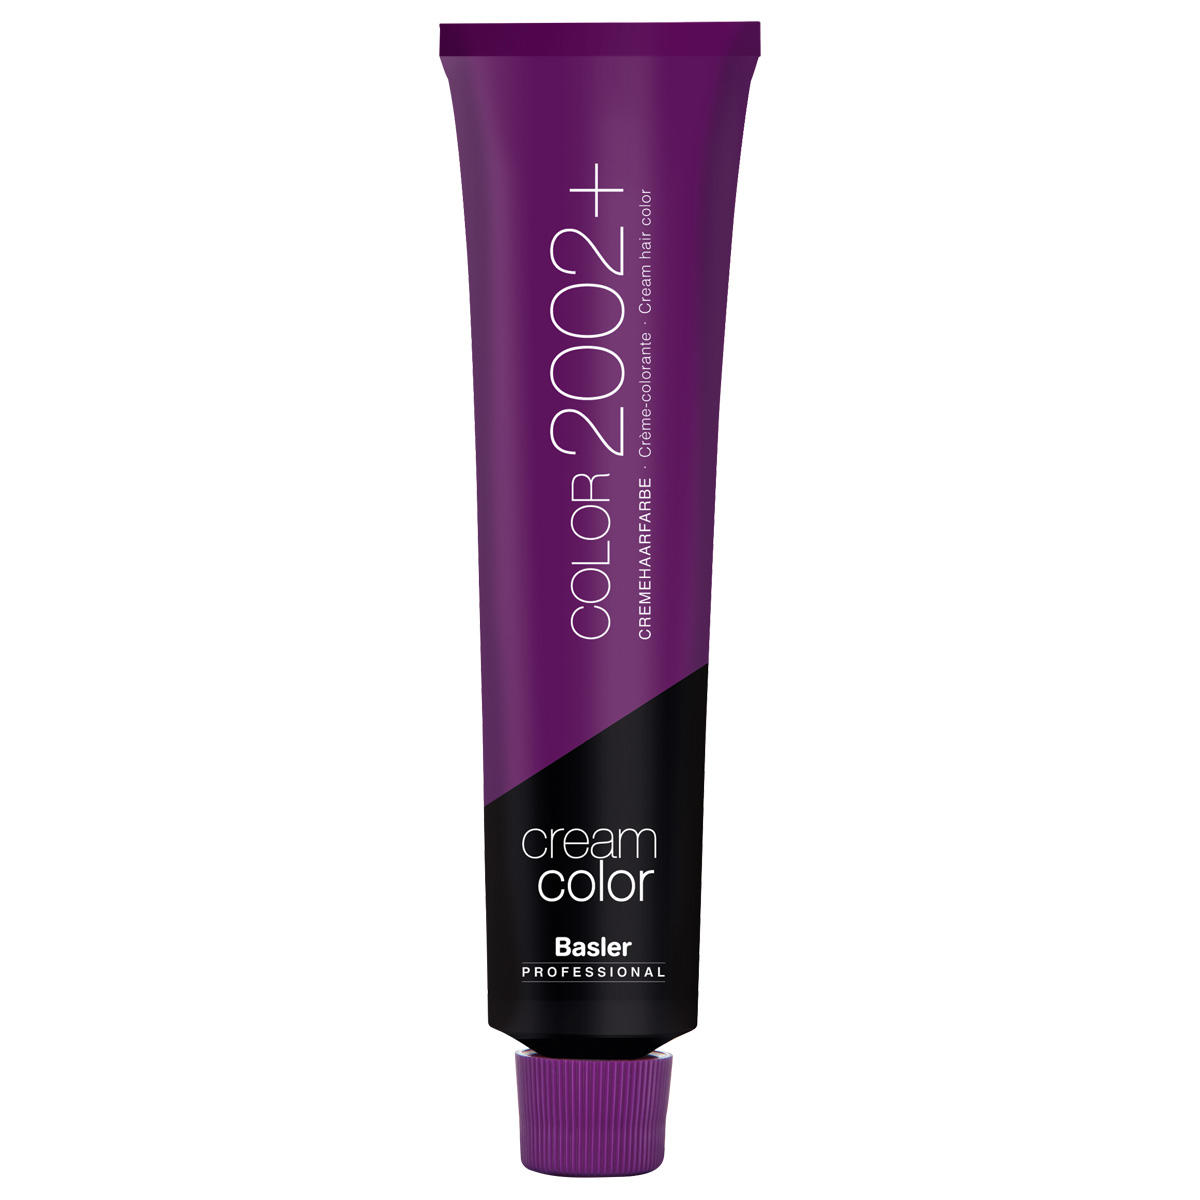 Basler Color 2002+ Cremehaarfarbe 10/8 lichtblond perl, Tube 60 ml - 1